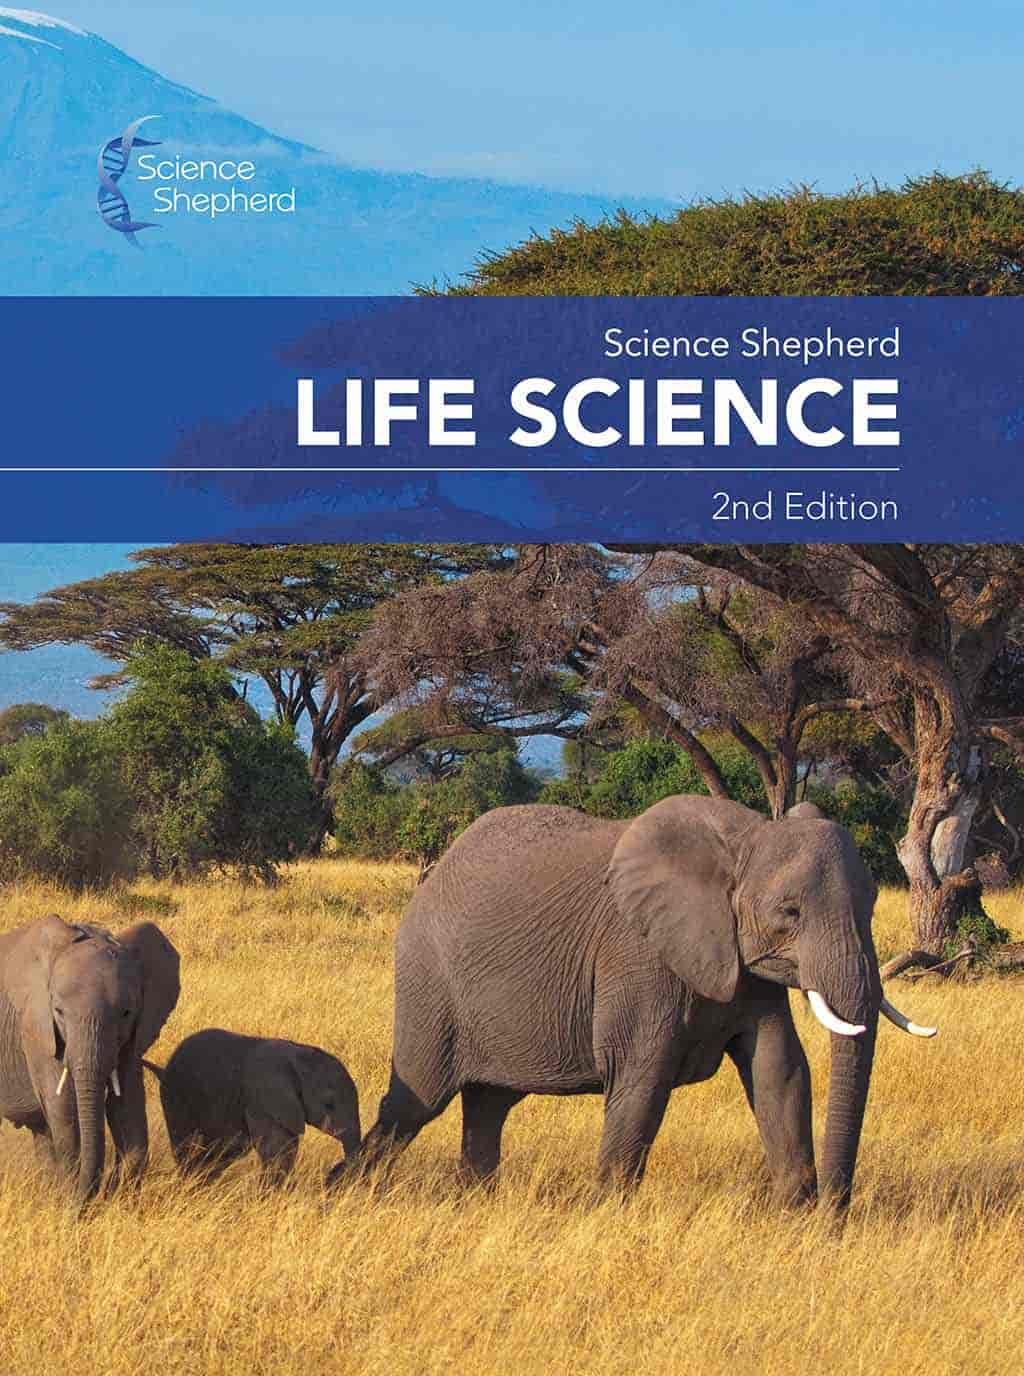 Home school Life Science textbook cover of elephants in Africa